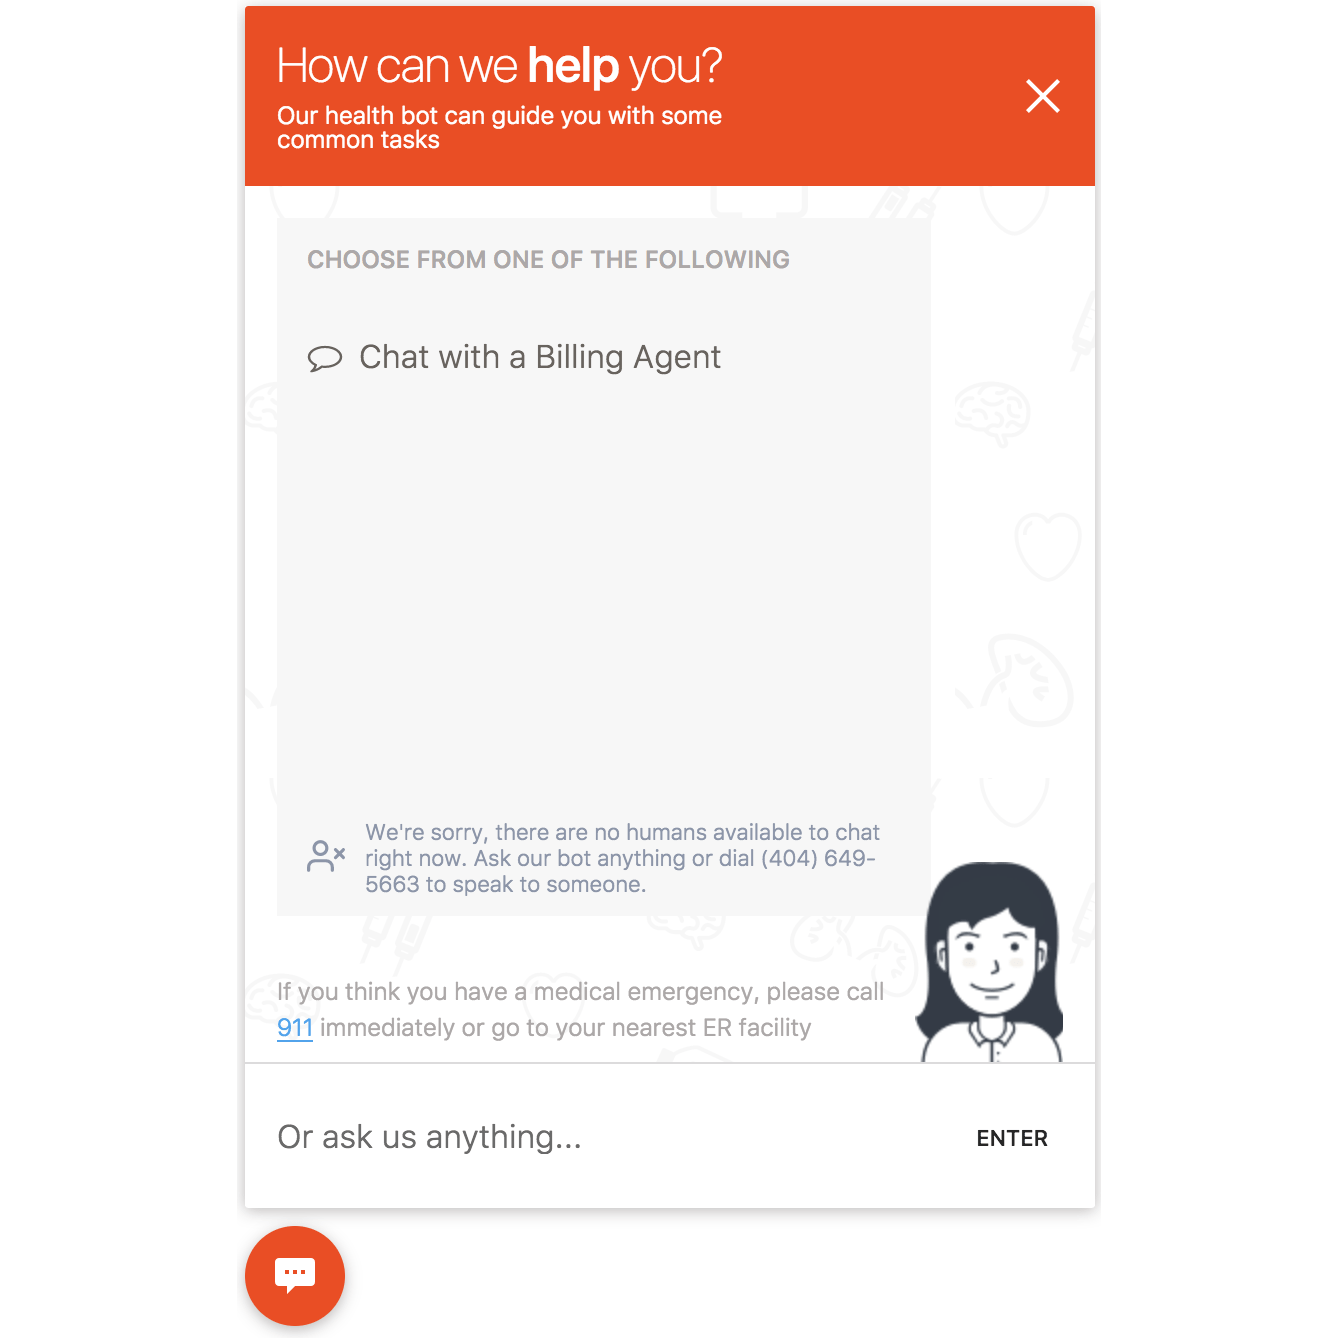 chat bot with billing agent for piedmont healthcare from Loyal healthcare